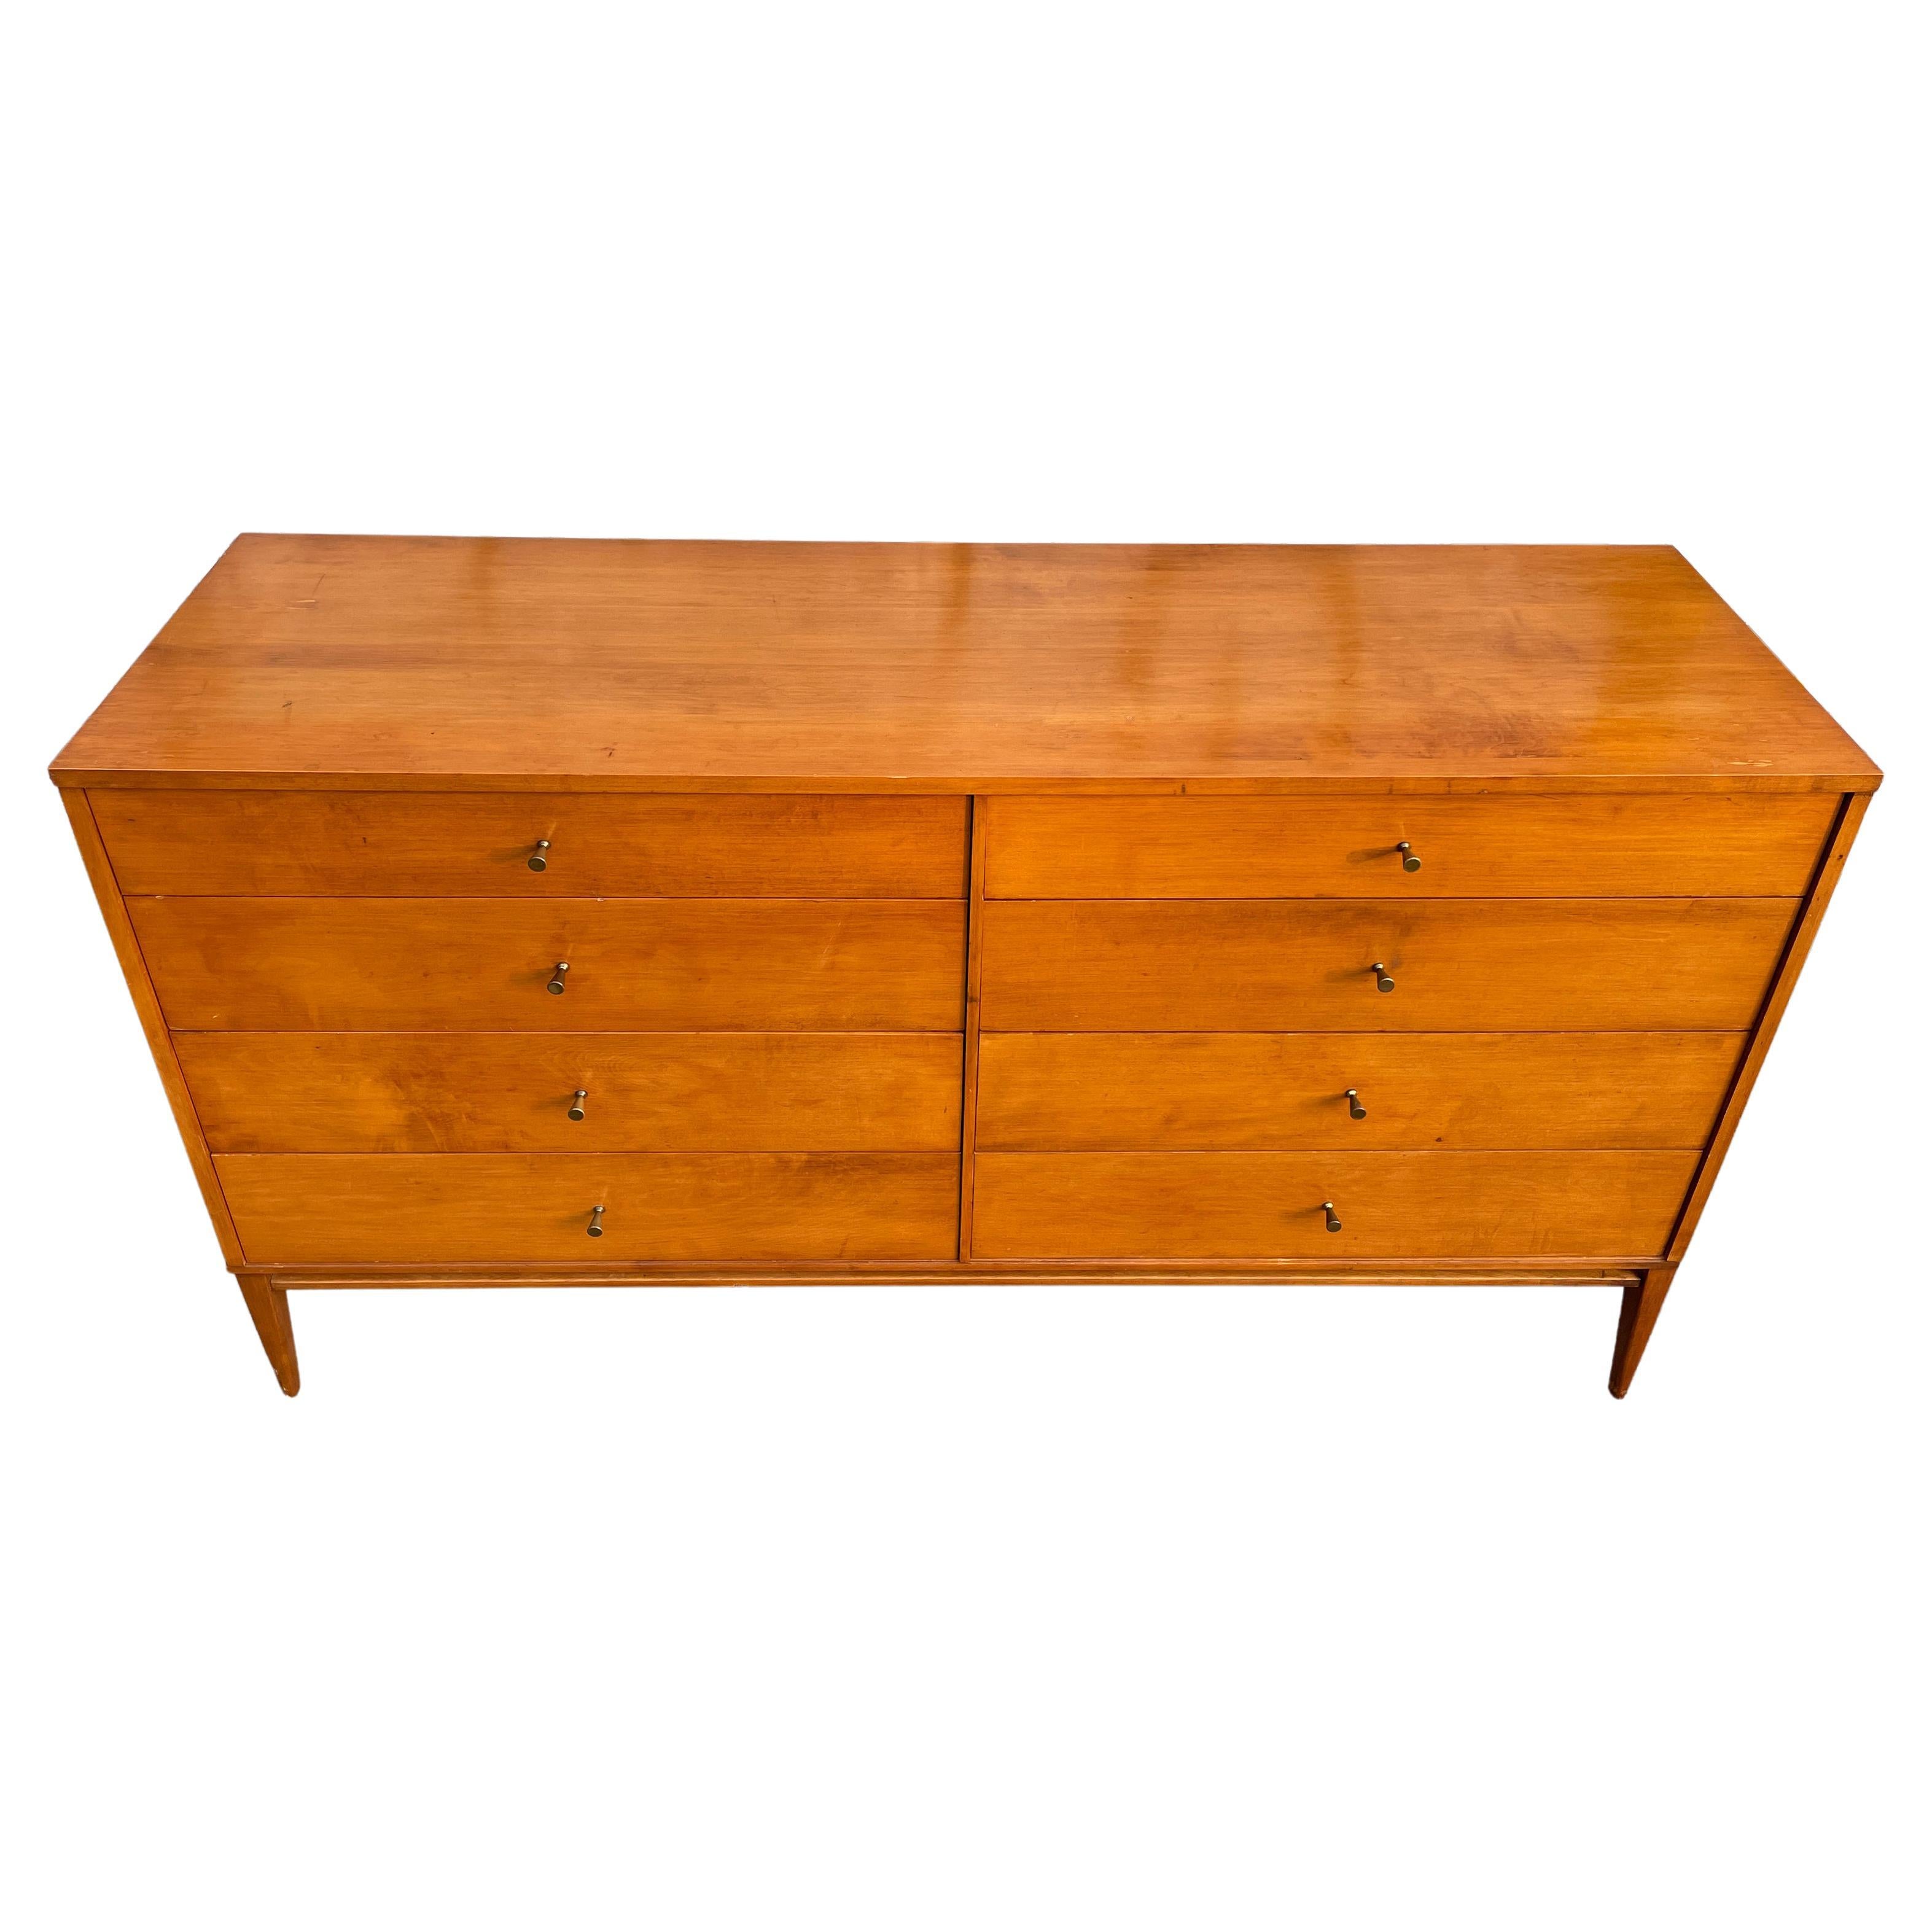 Vintage Mid century Paul McCobb 8-drawer dresser credenza Planner Group #1507. Beautiful dresser by Paul McCobb circa 1950s Planner Group 8-drawer Blonde Maple finish over solid maple polished Brass cone pulls with solid maple base. Original Burn